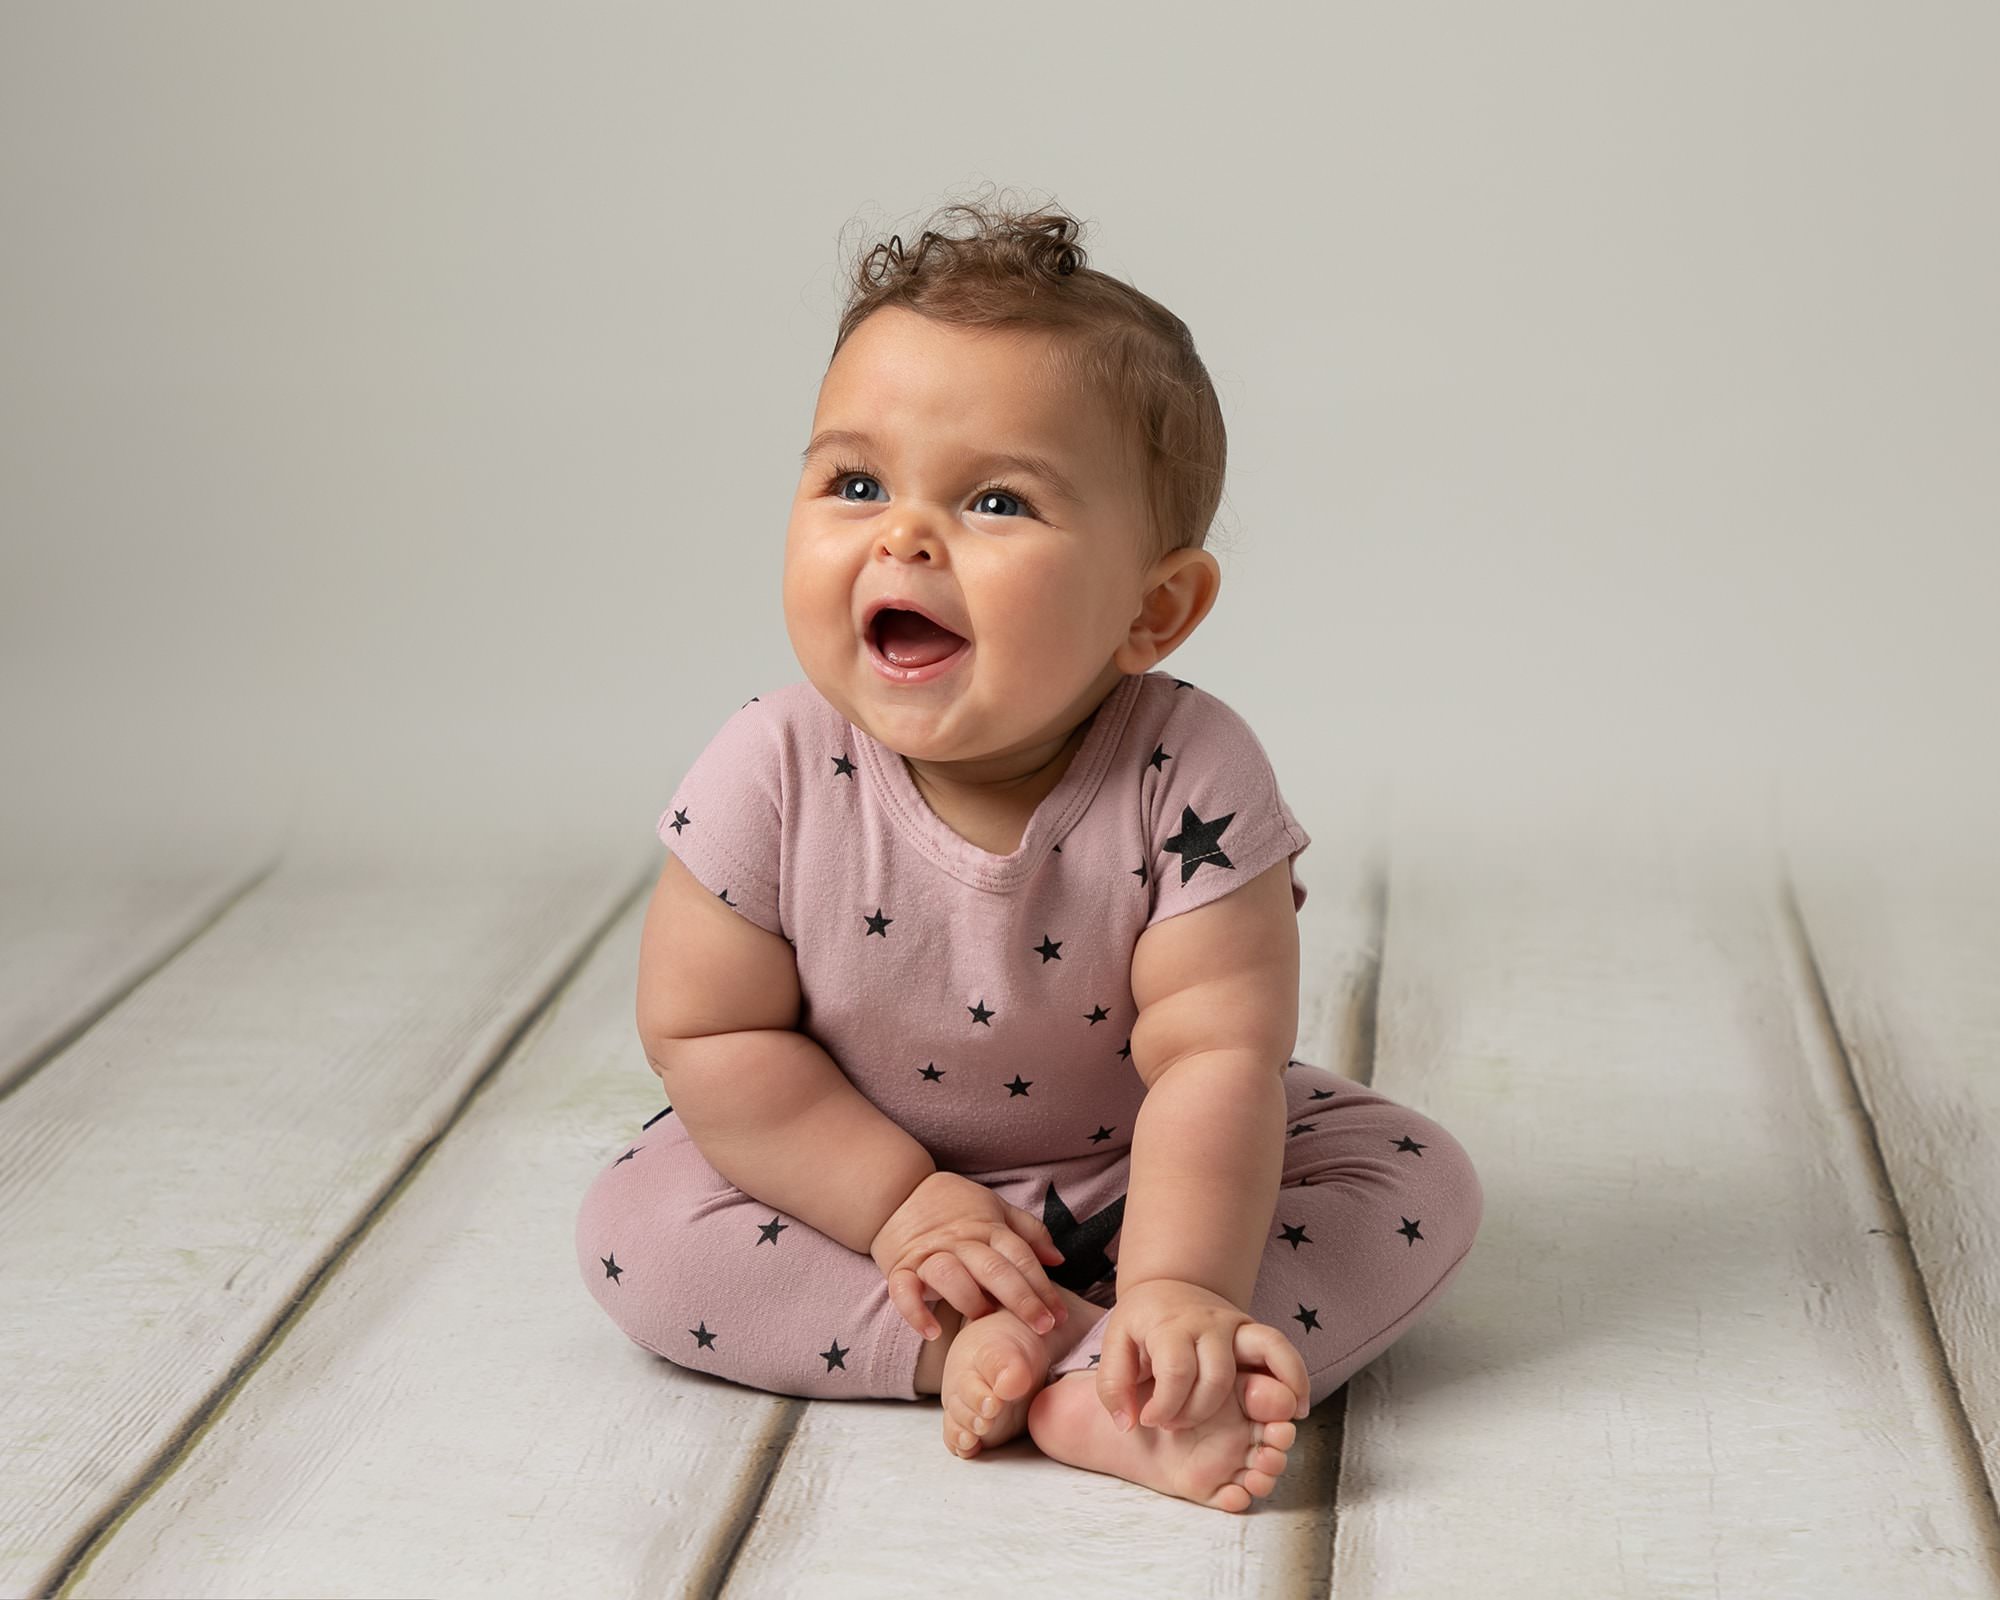 Baby girl smiling at her parent in a baby photoshoot in Glasgow. Girl wears a pink romper with blue stars